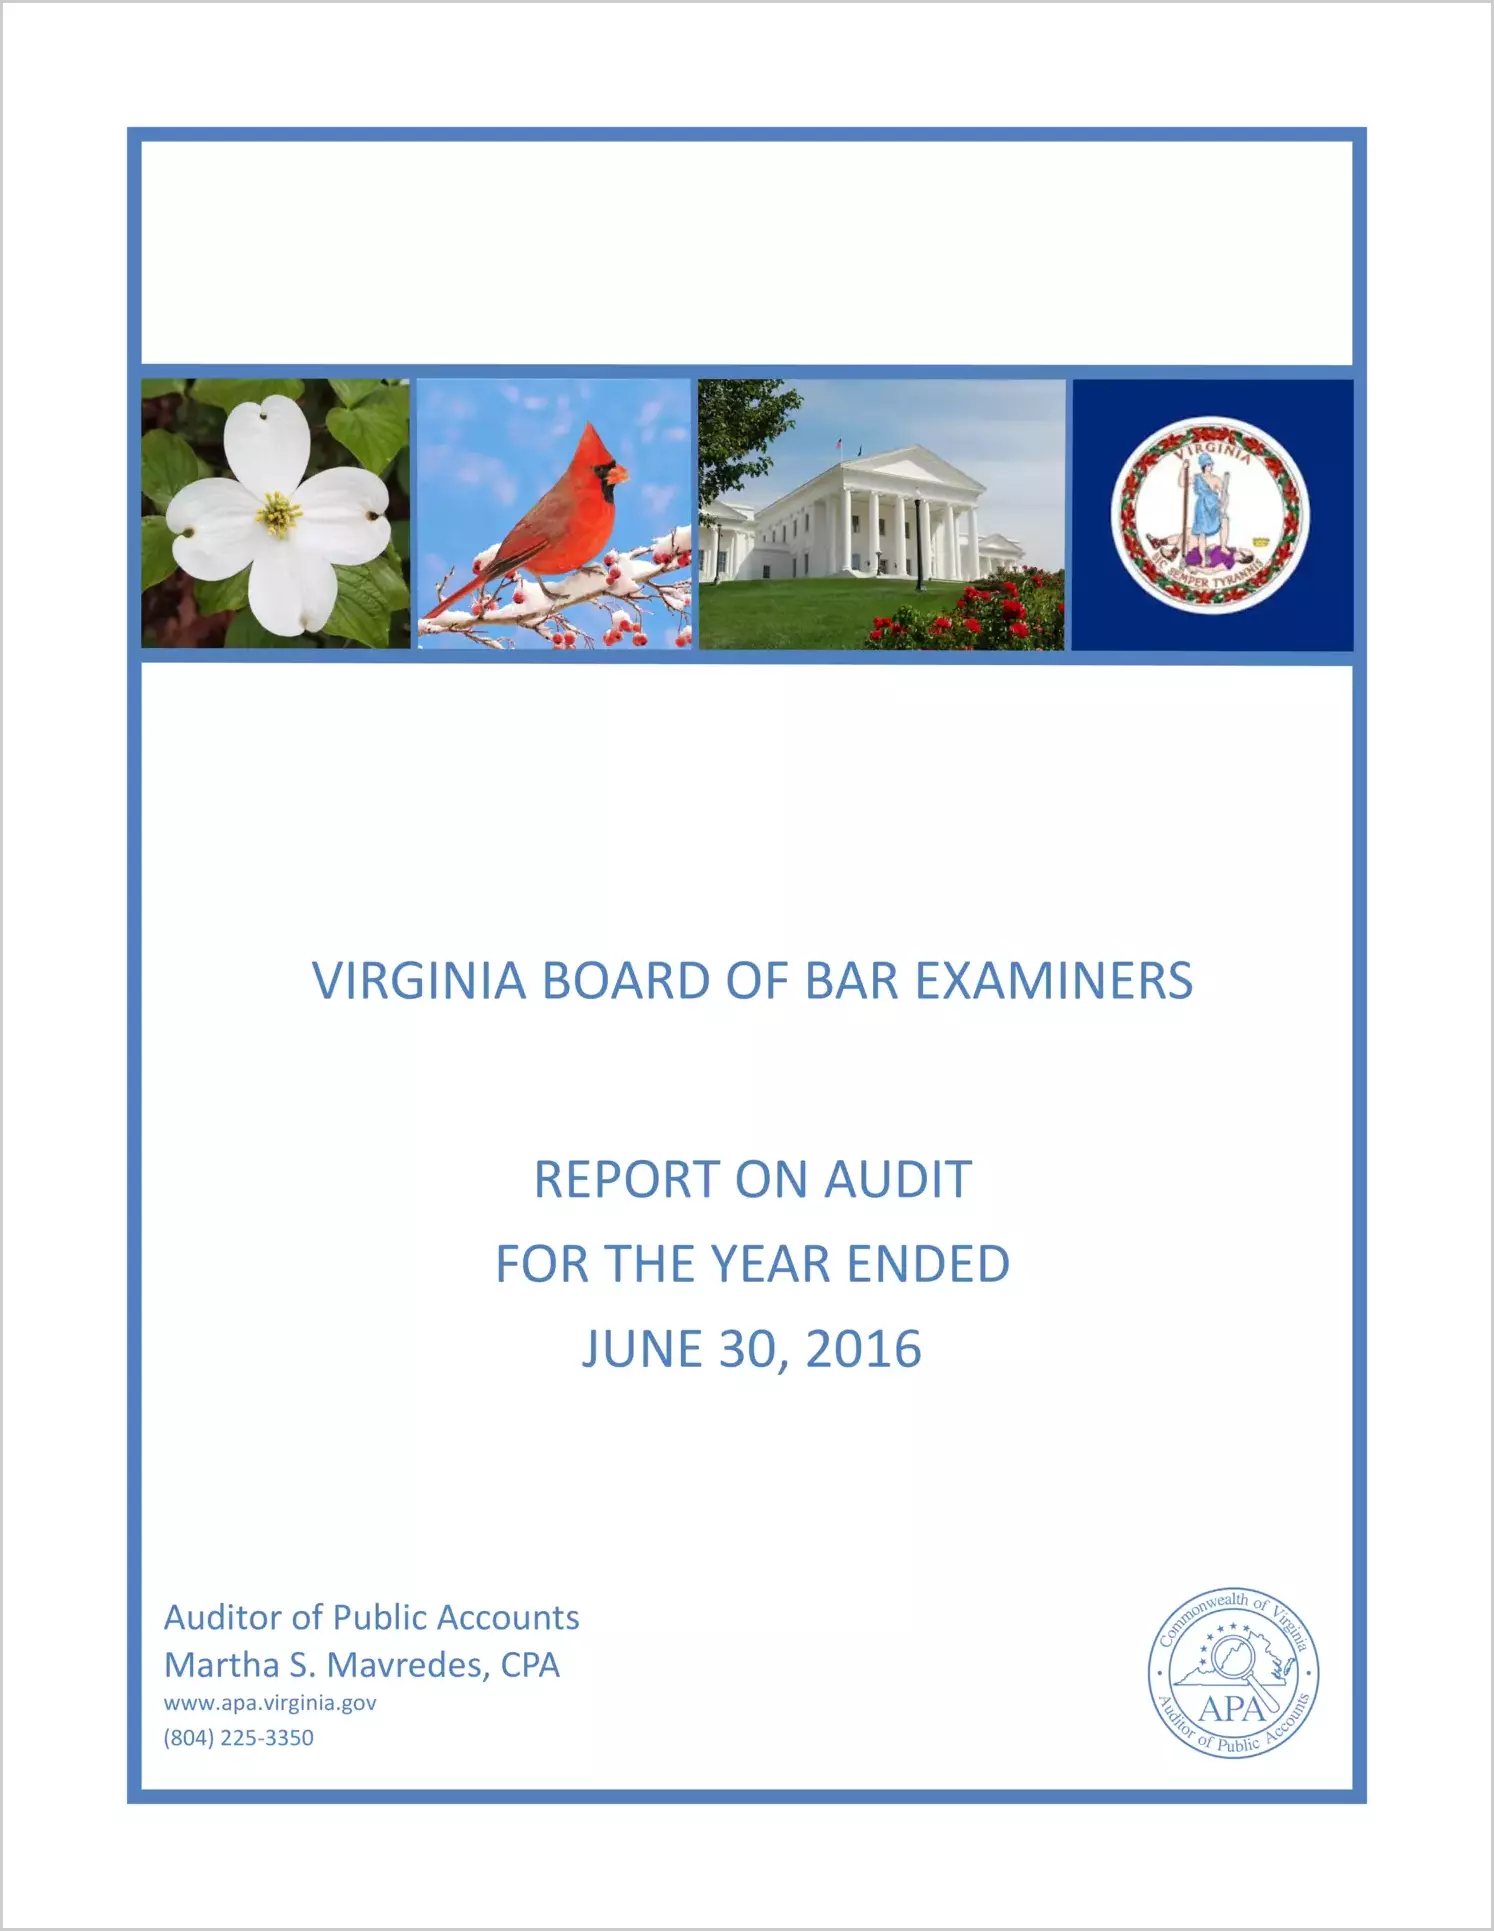 Virginia Board of Bar Examiners for the year ended June 30, 2016